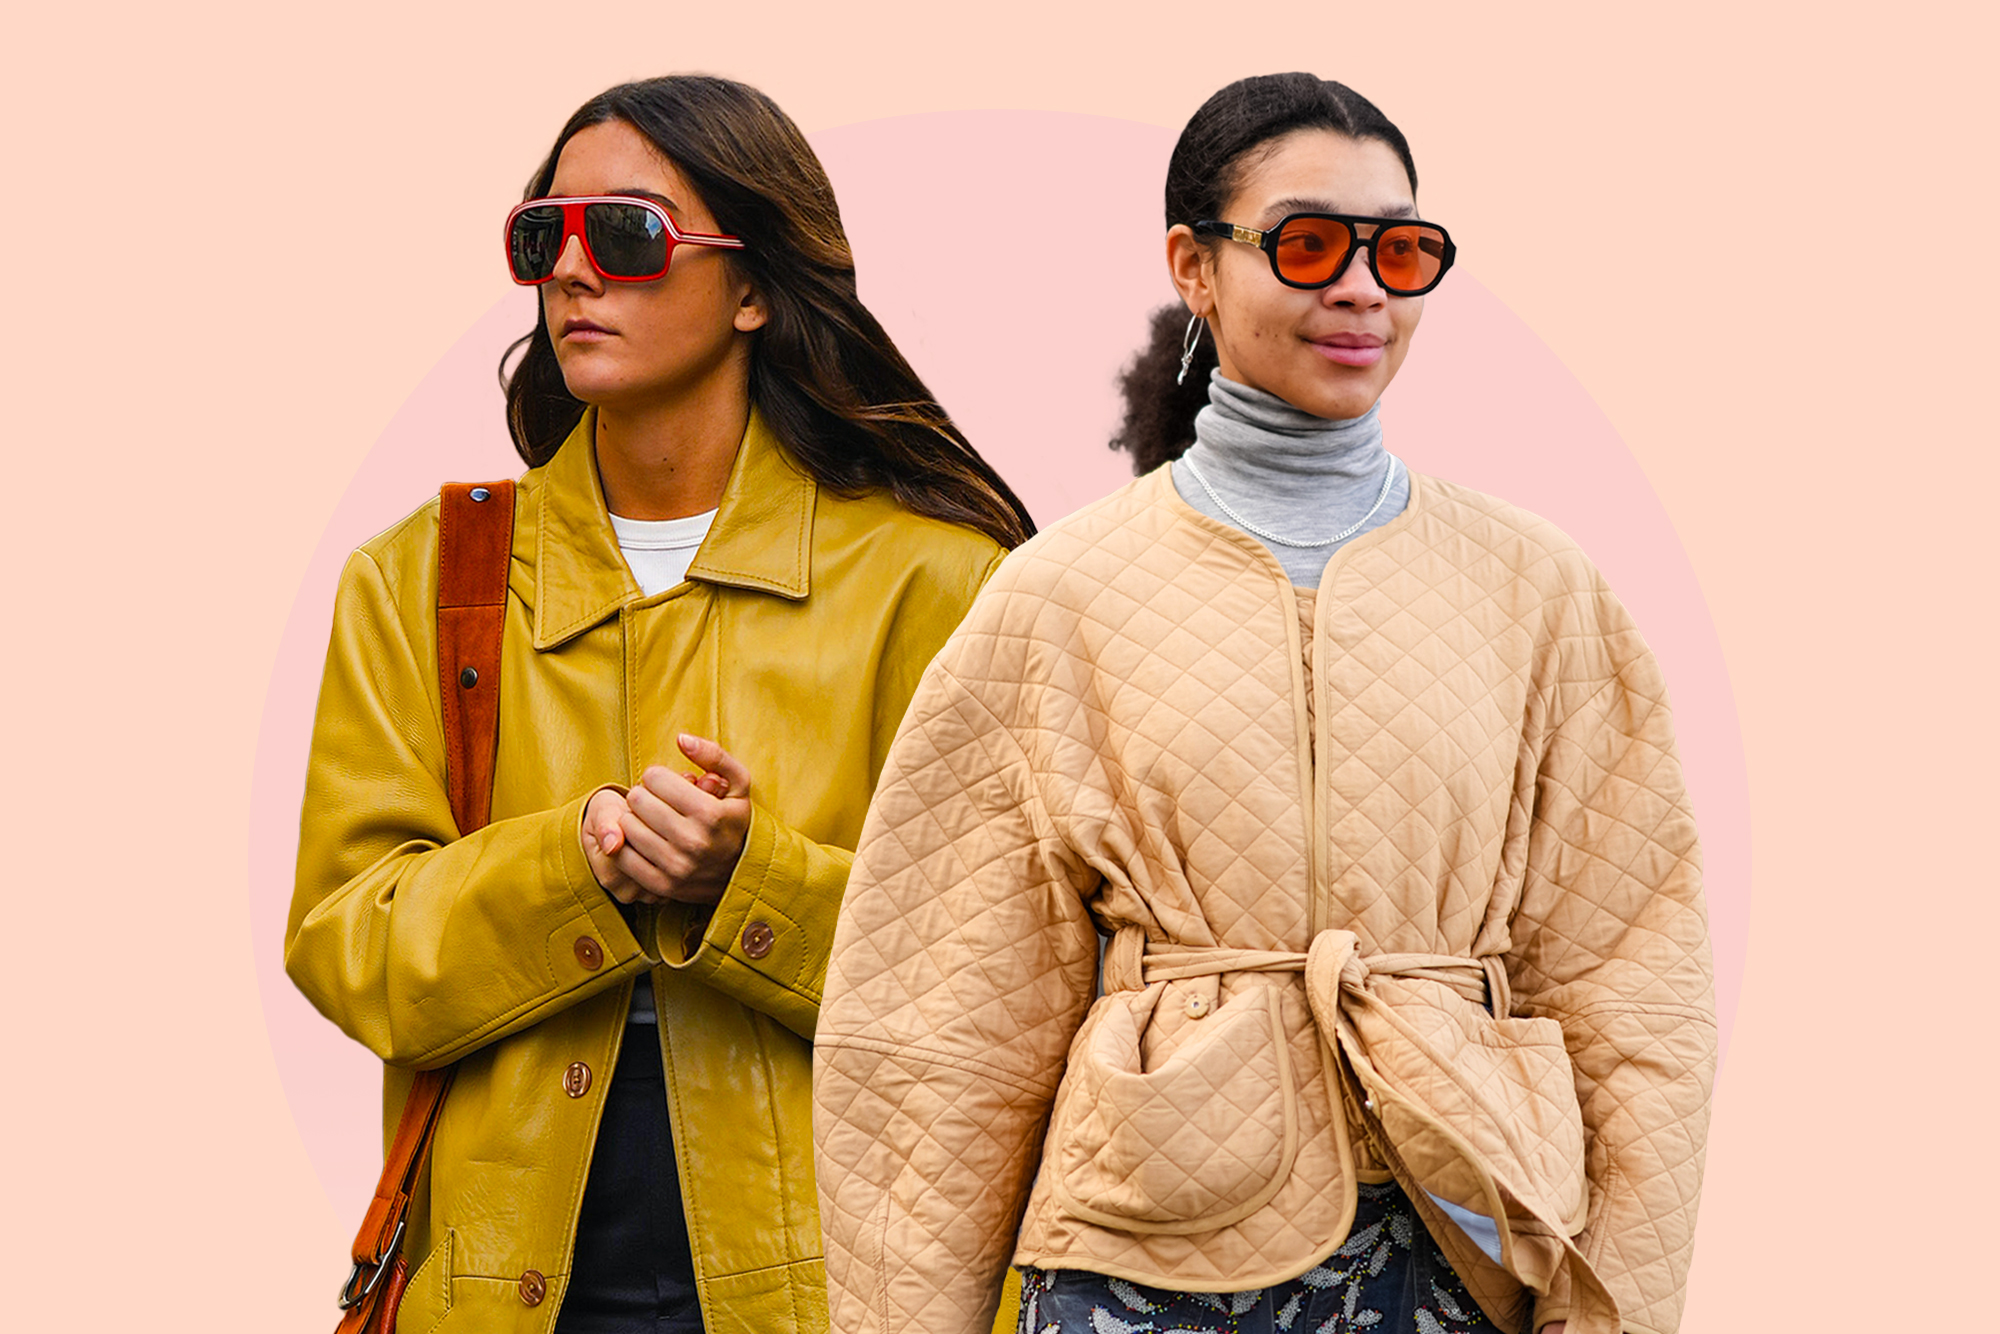 two women, one wearing a yellow jacket and red purse and the other wearing a tan jacket